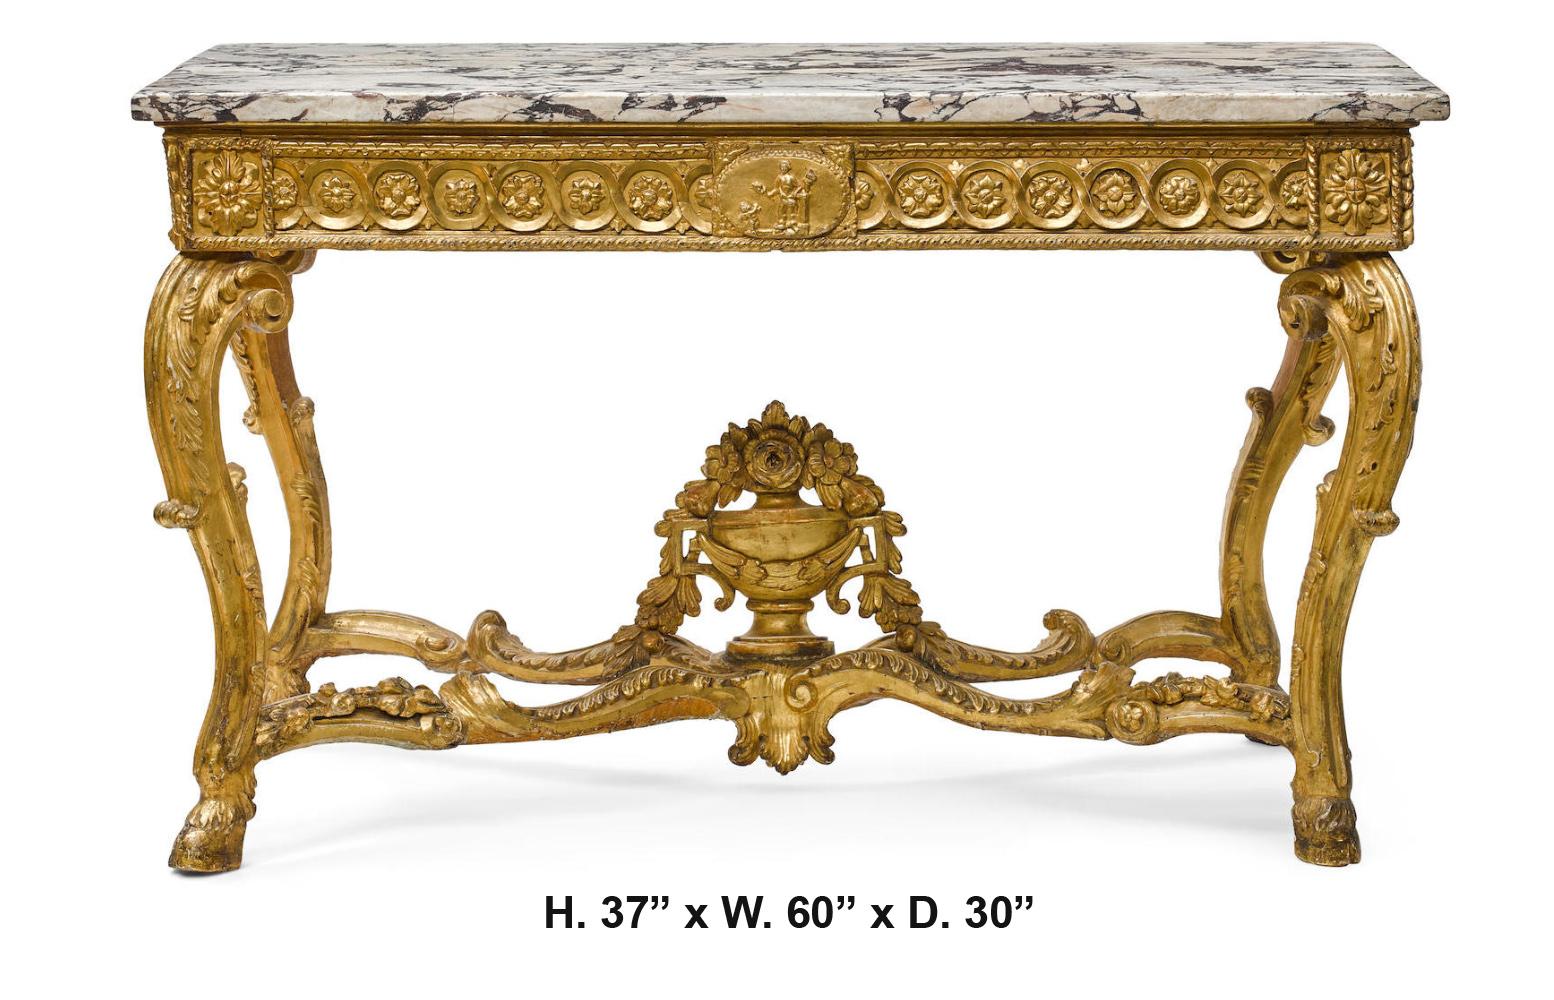 Outstanding Italian neoclassical carved giltwood console with marble top and beautiful gilding,
late 18th-early 19th century.
Bearing Sotheby's auction lot sticker, which indicates that it originally came from Sotheby's New York.

The